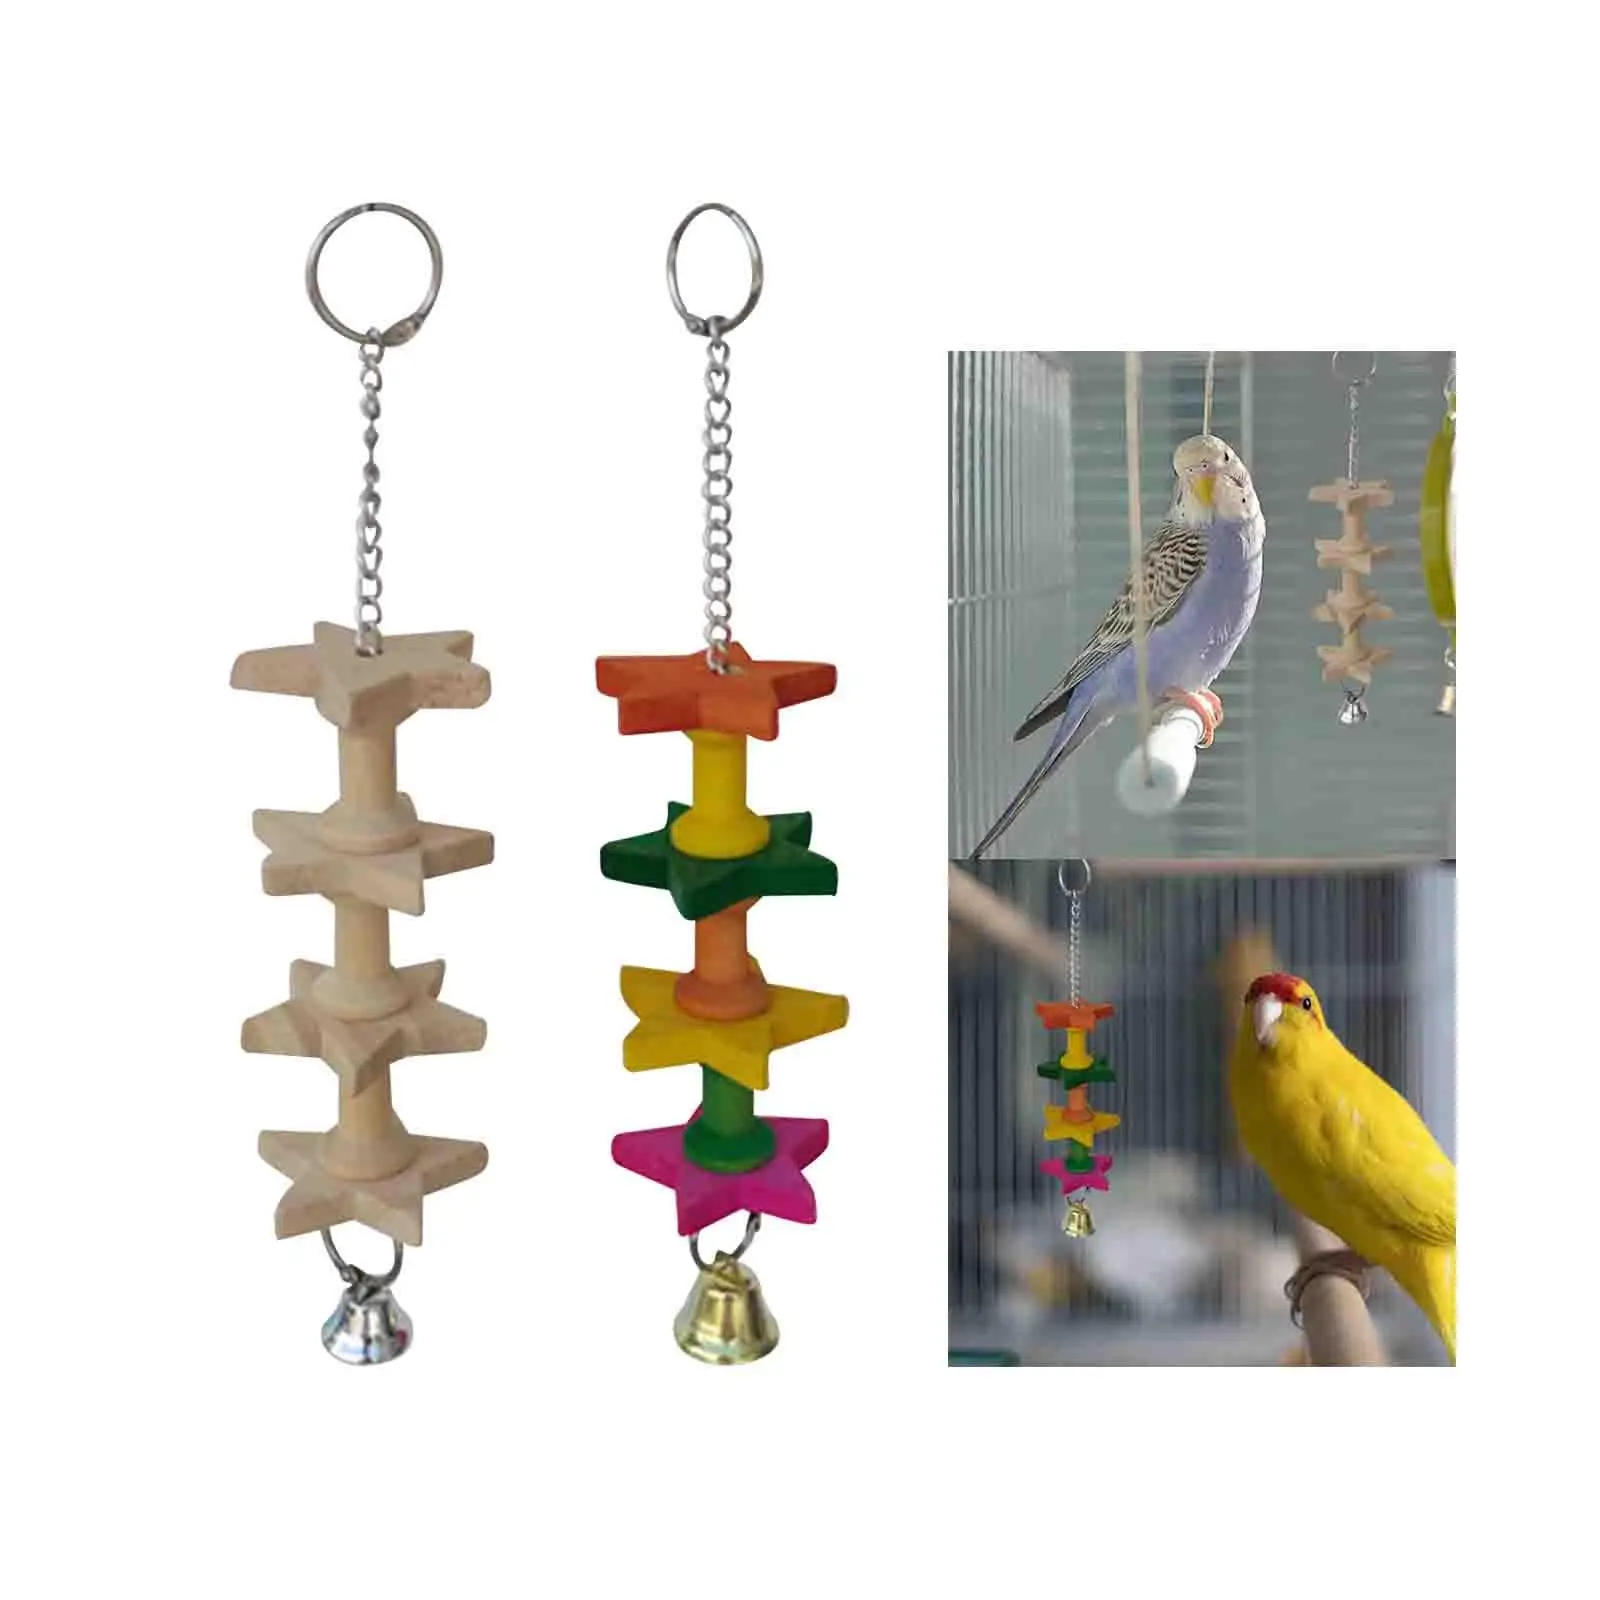 Wood Parrot Toy with Bell Ornament Accs Training Molar Toy Bird Chewing Toy for Budgies Cockatoos Cockatiels Lovebird Parakeets